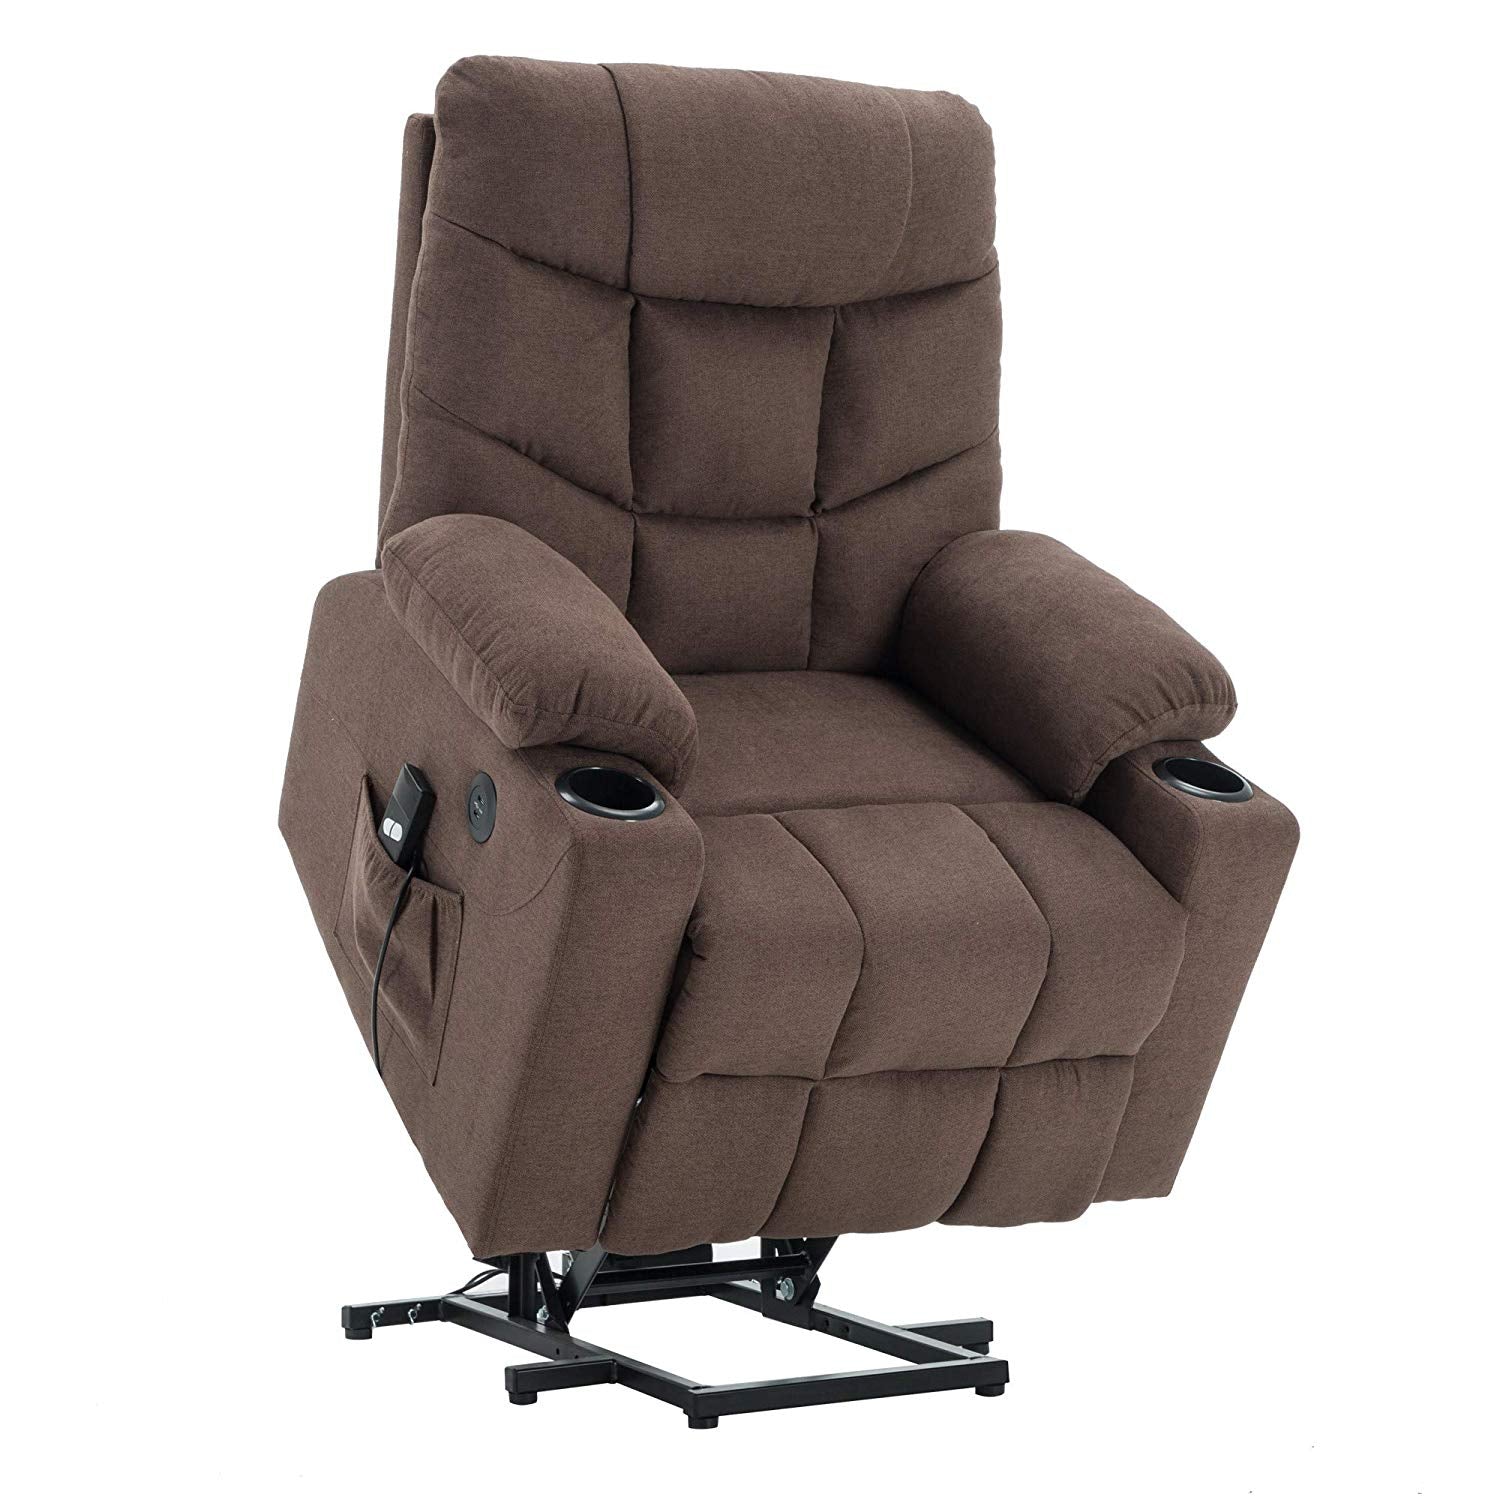 Power Lift Recliner Chair Tuv Lift Motor Lounge W Remote Control Dual